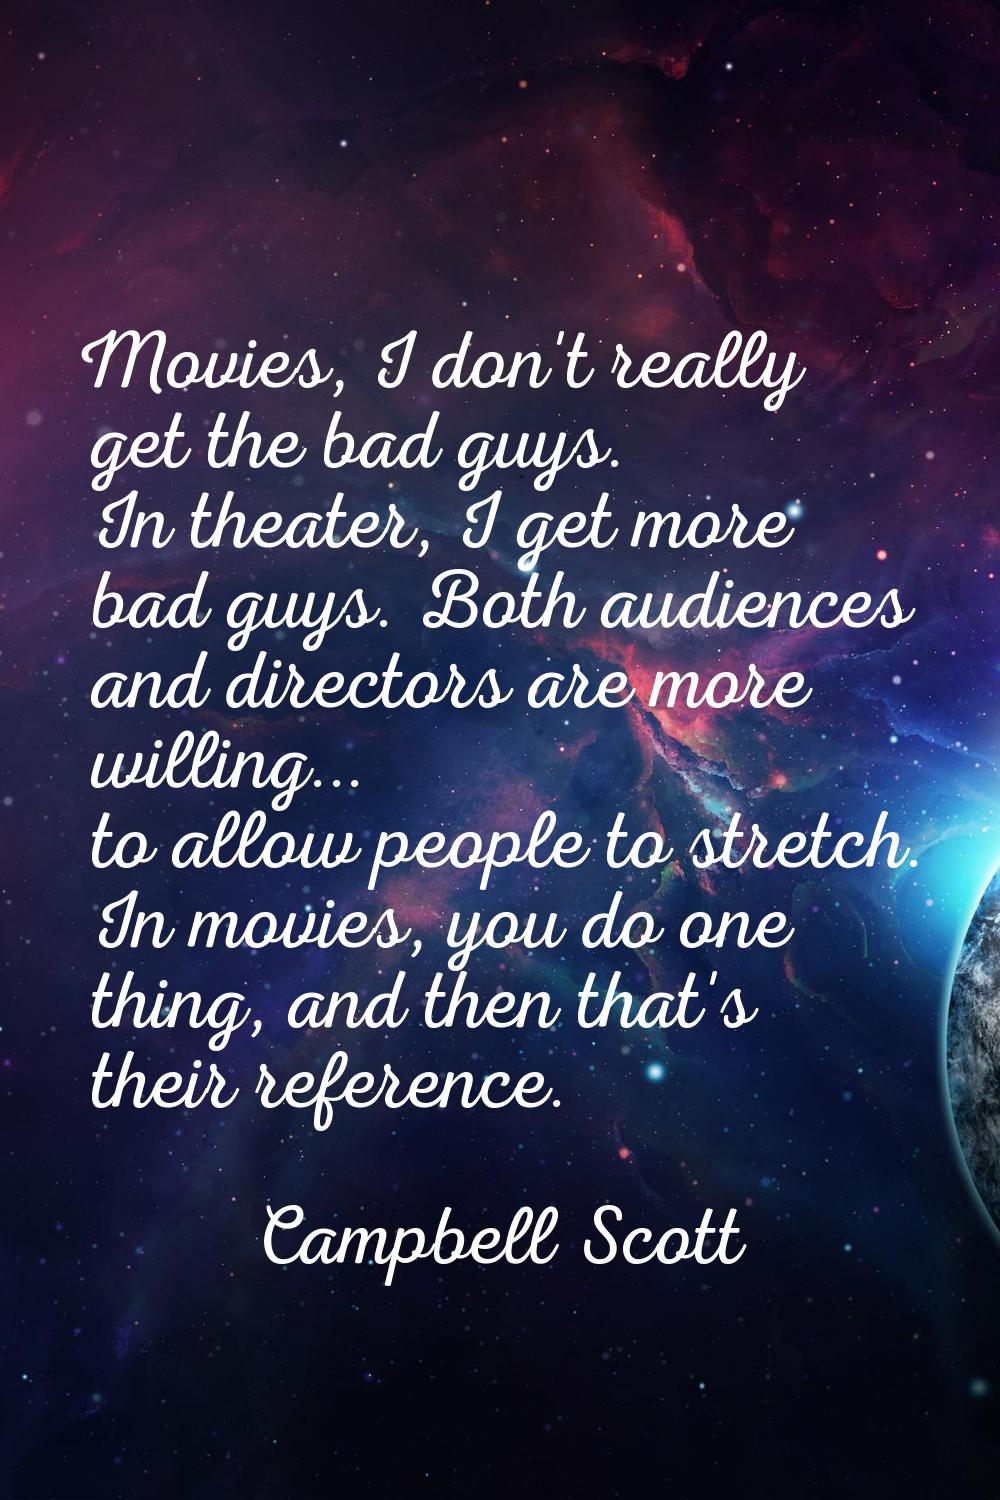 Movies, I don't really get the bad guys. In theater, I get more bad guys. Both audiences and direct